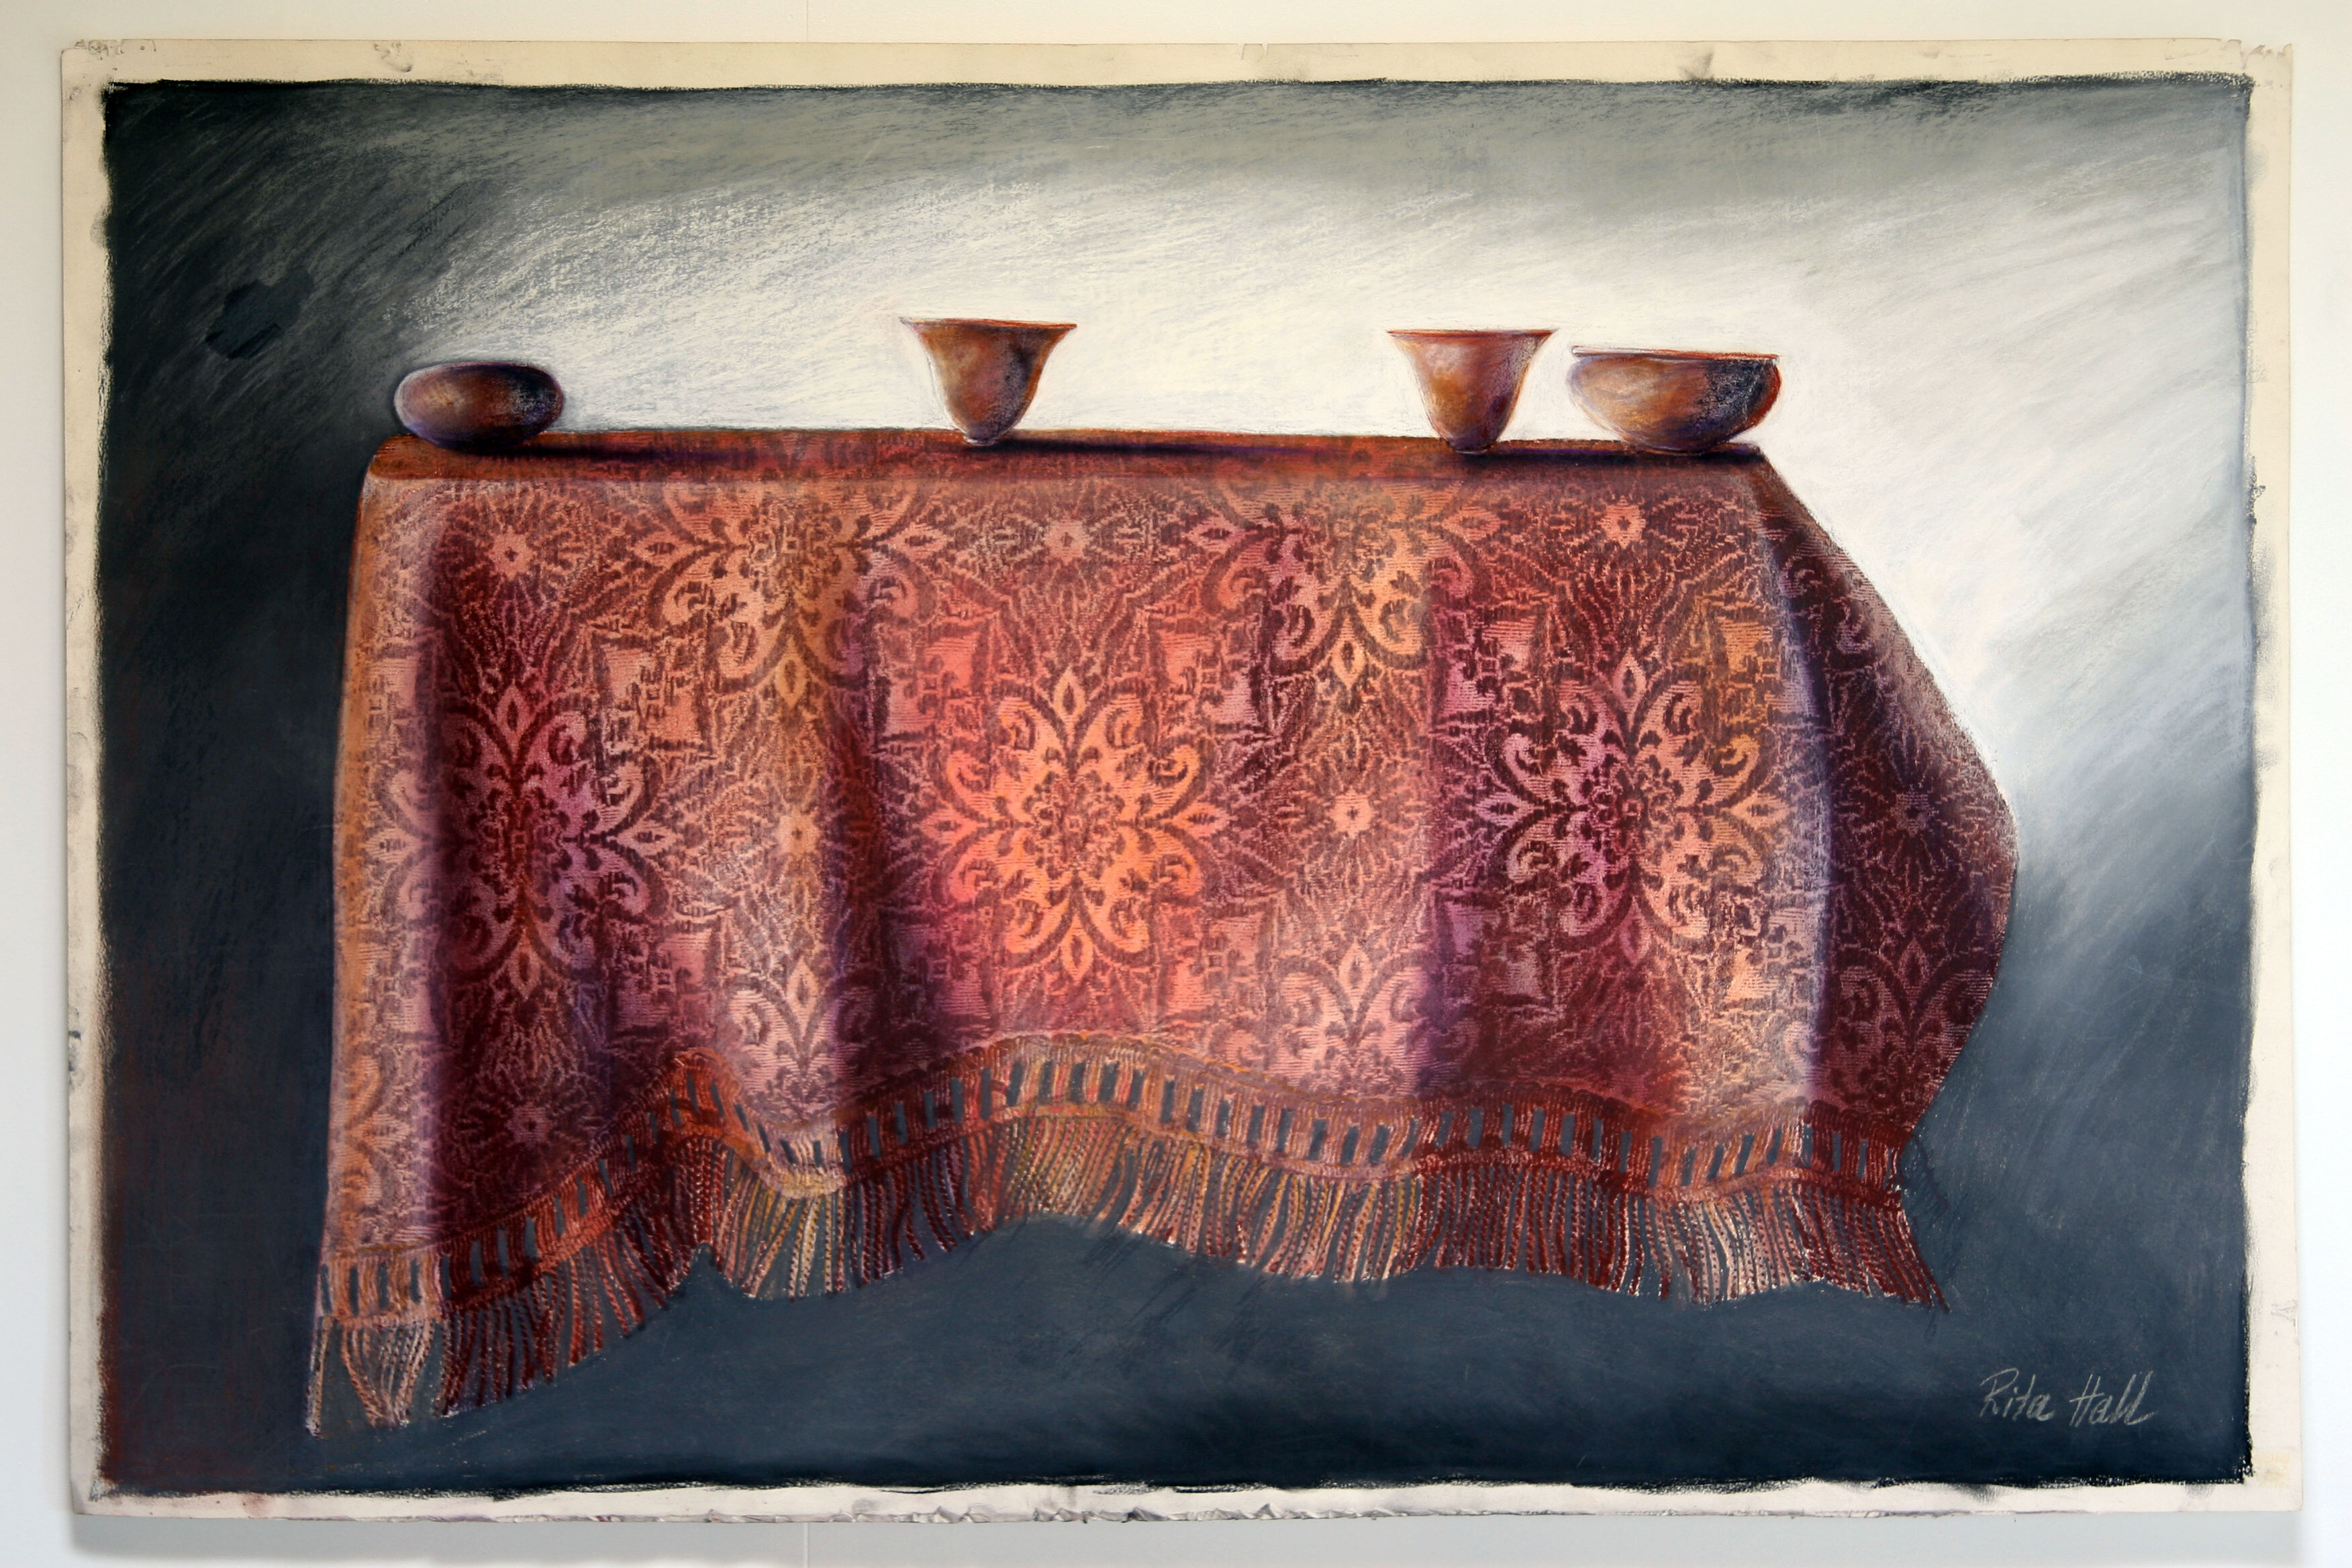 Table with four bowls 2000 75x100cm collograph pastel